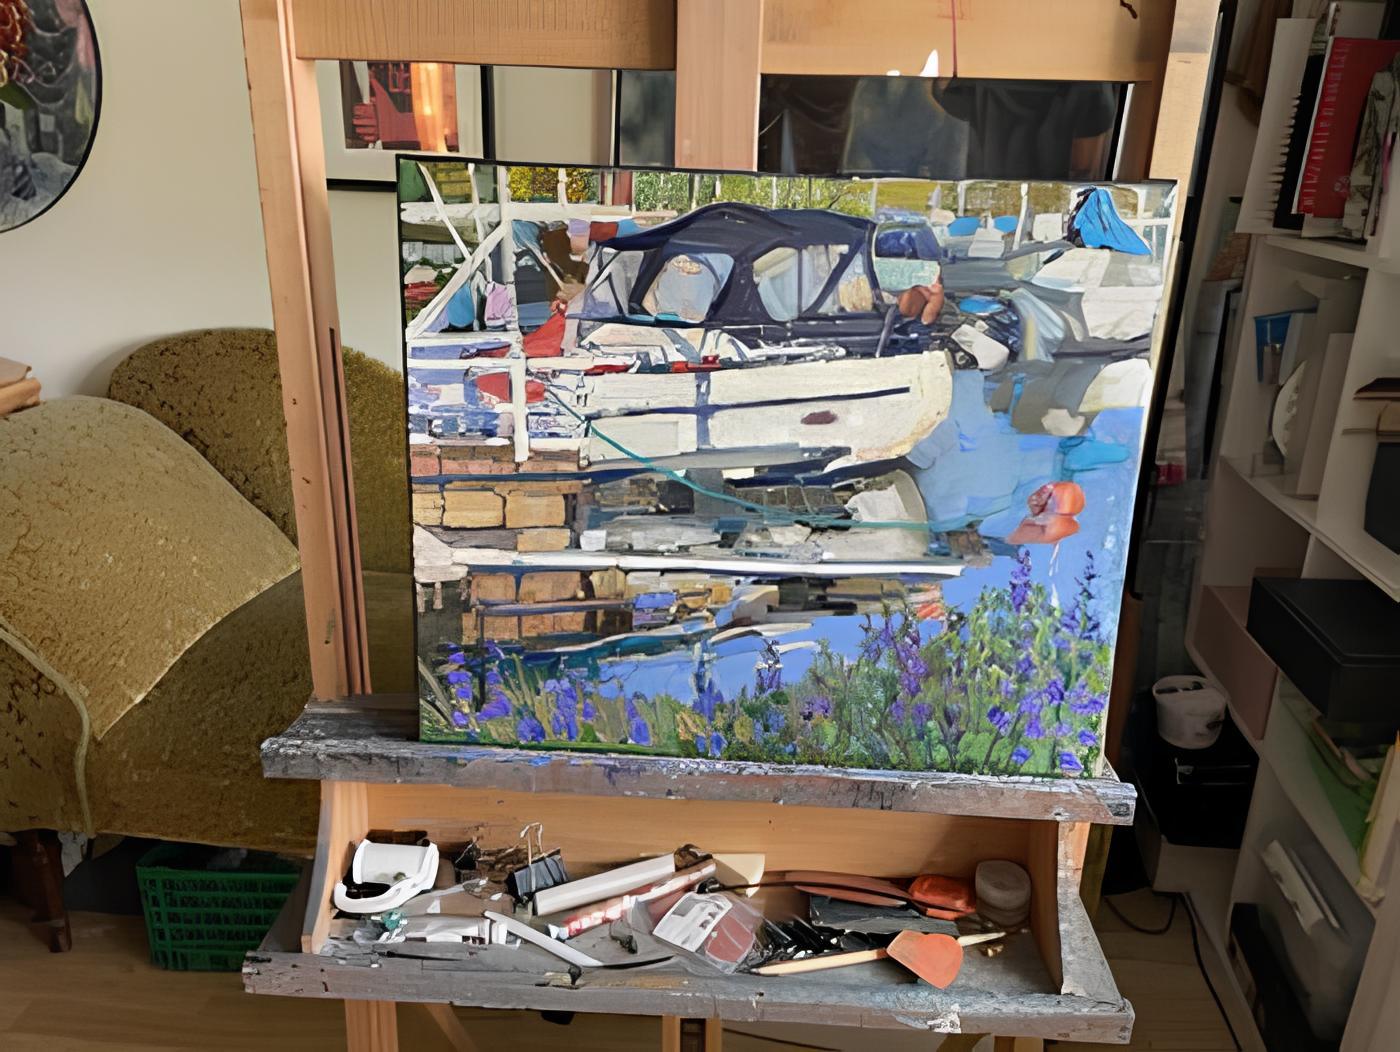 n crafting this piece, I embraced the raw beauty of the marina at dusk; its serene chaos, the dance of colors, and the balance of man-made vessels with nature's wild strokes. Effortlessly, my brushstrokes captured the reflections on water, tender